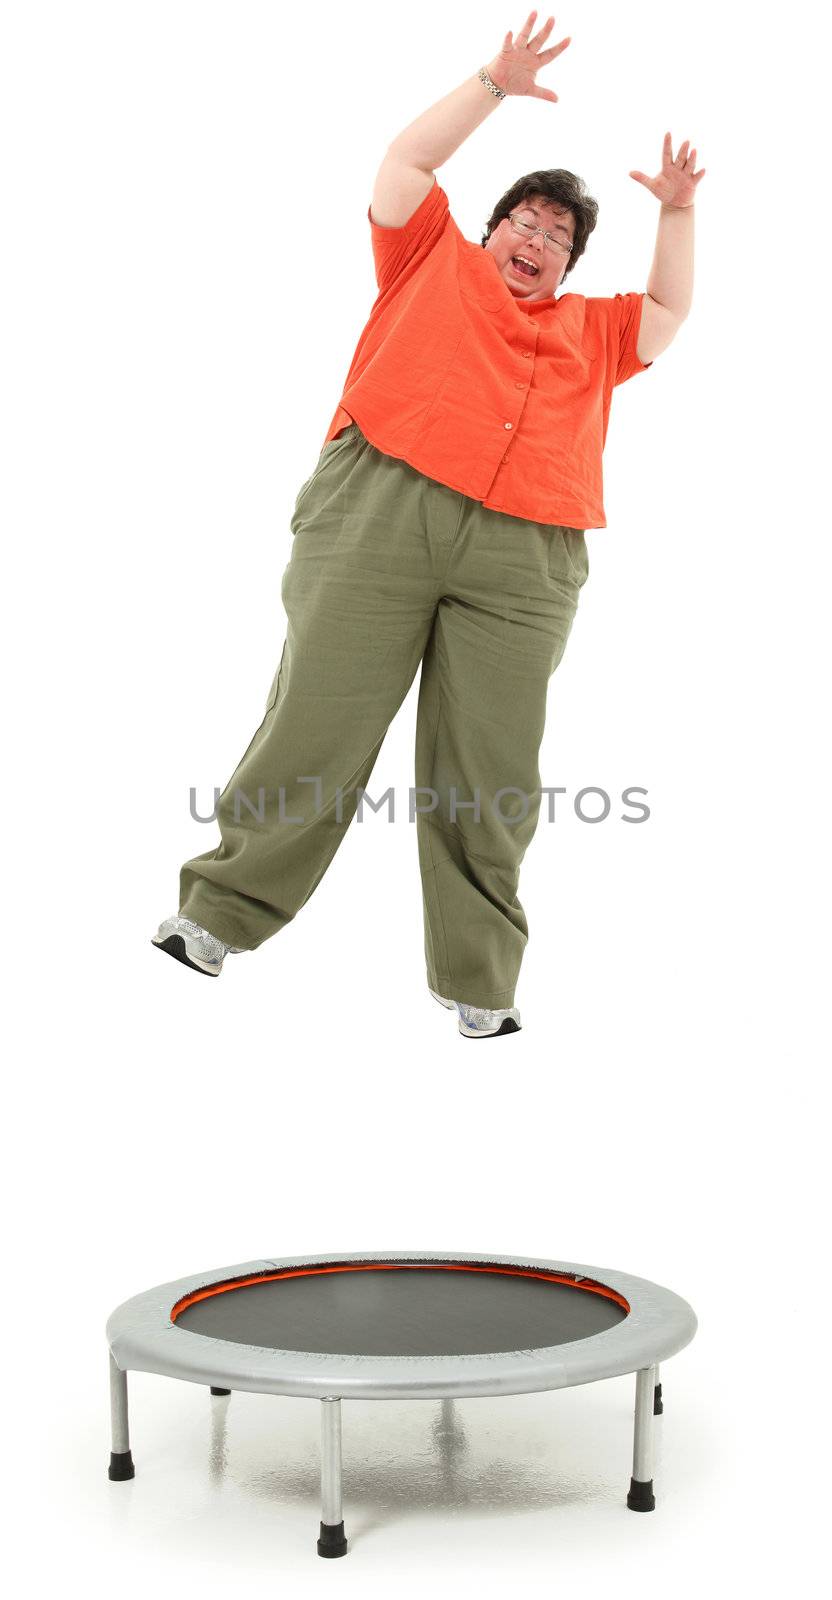 Excited forties obese woman jumping on trampoline over white background.